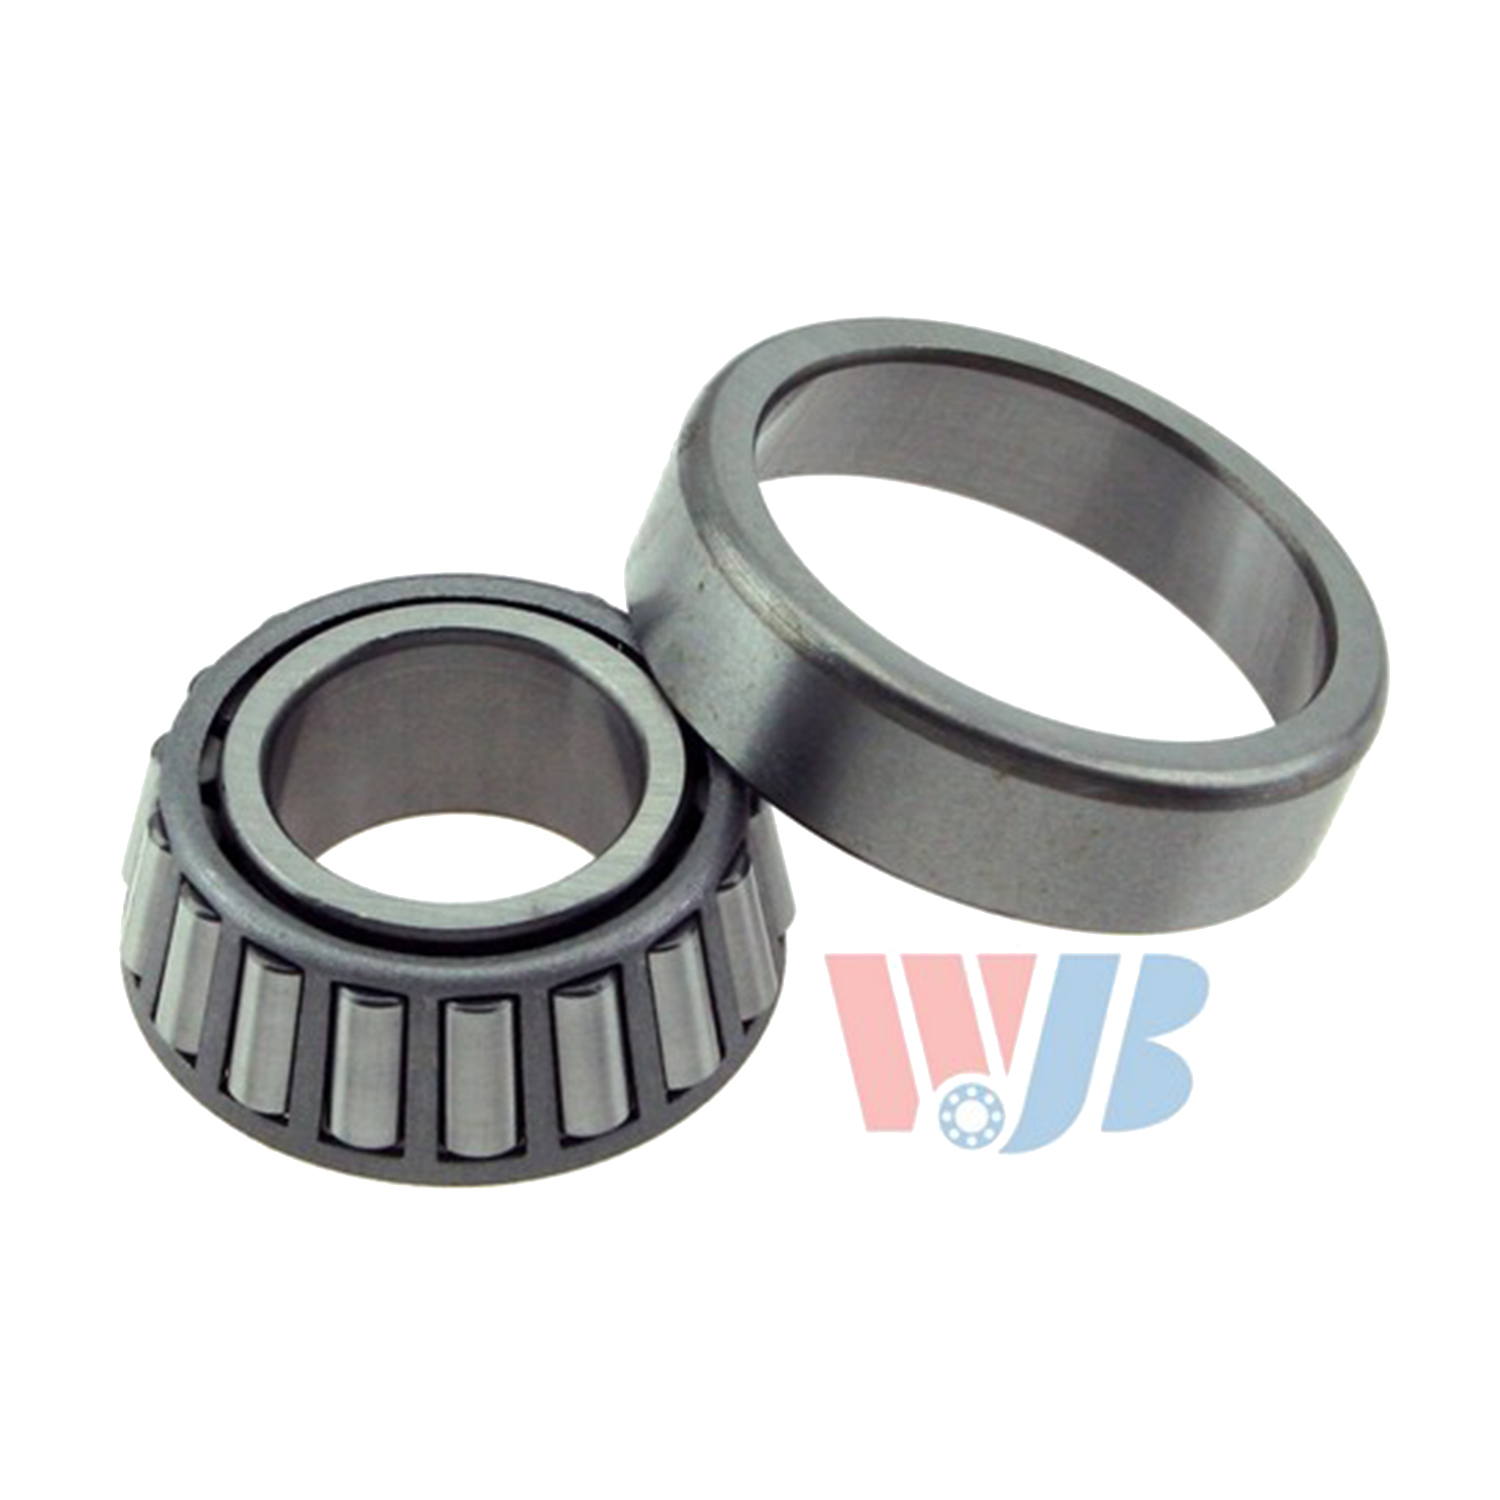 Front Wheel Bearing Seal Pair Set of 2 for Ford Lincoln Mercury Mazda Brand New